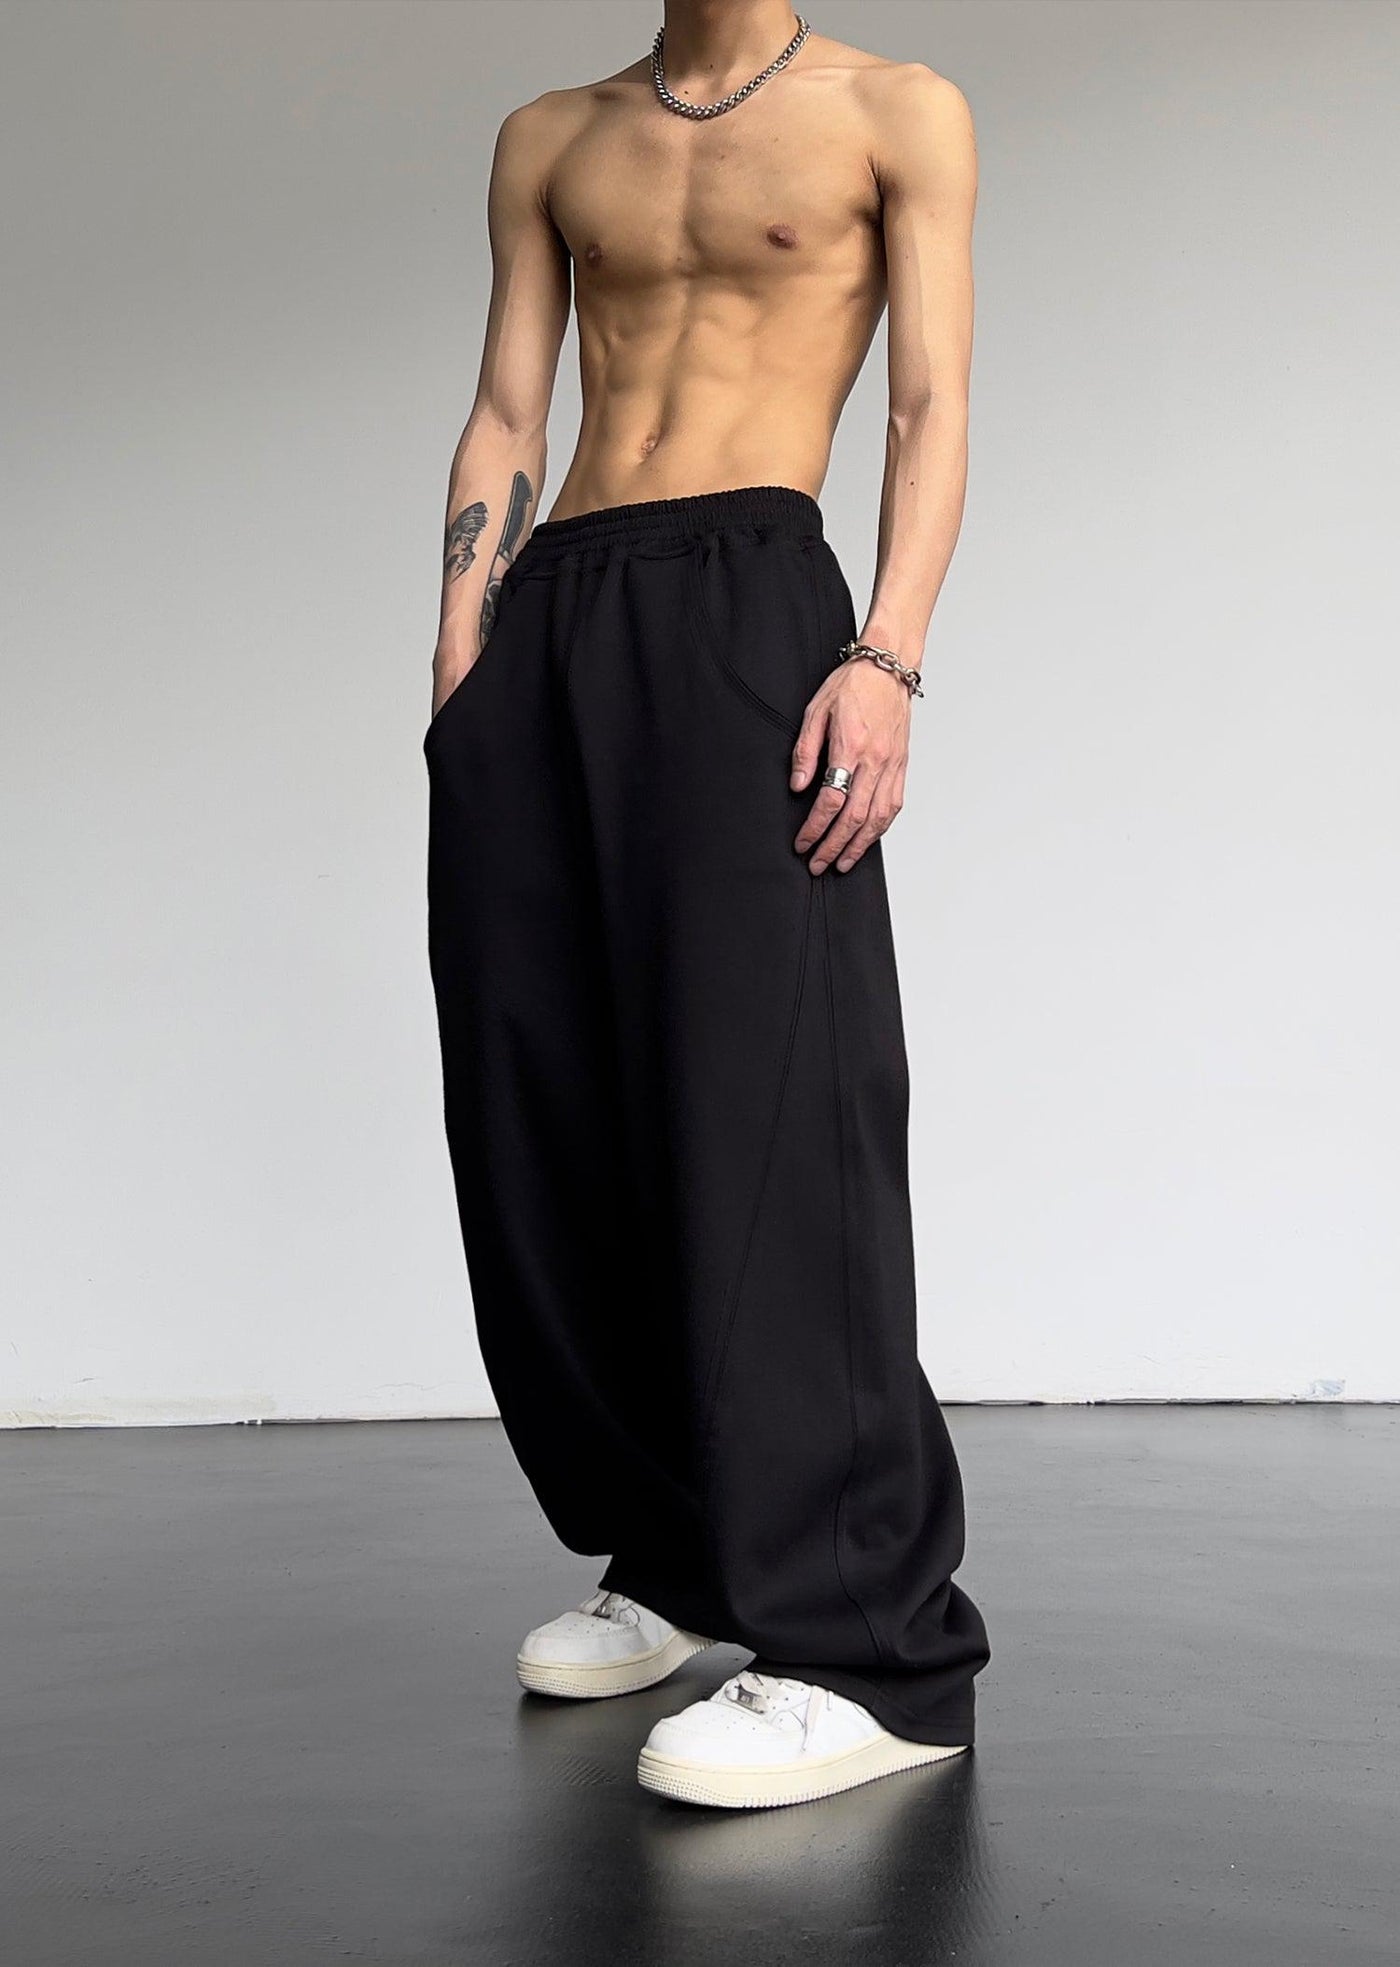 MEBXX Solid Relaxed Fit High Waisted Sweatpants Korean Street Fashion Pants By Made Extreme Shop Online at OH Vault